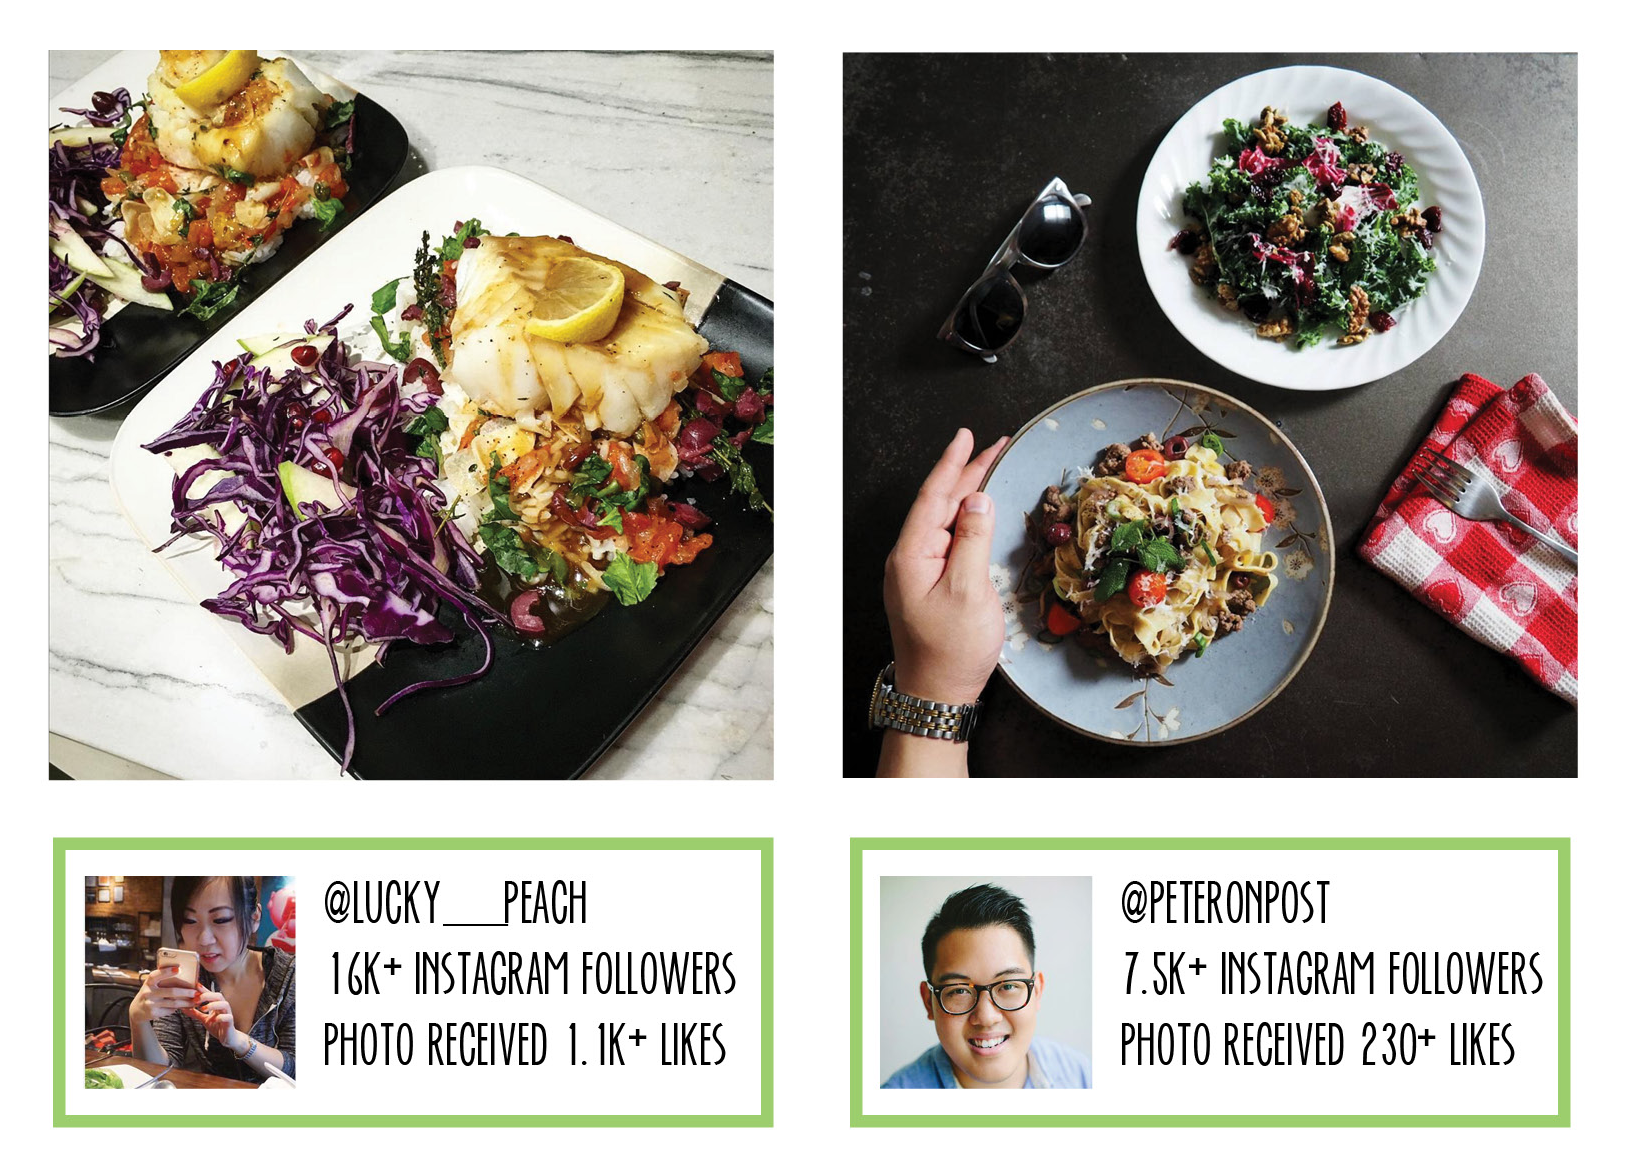 Going Bold Studio | Social Media Case Study | Meal Kit Service Influencer Marketing Campaign